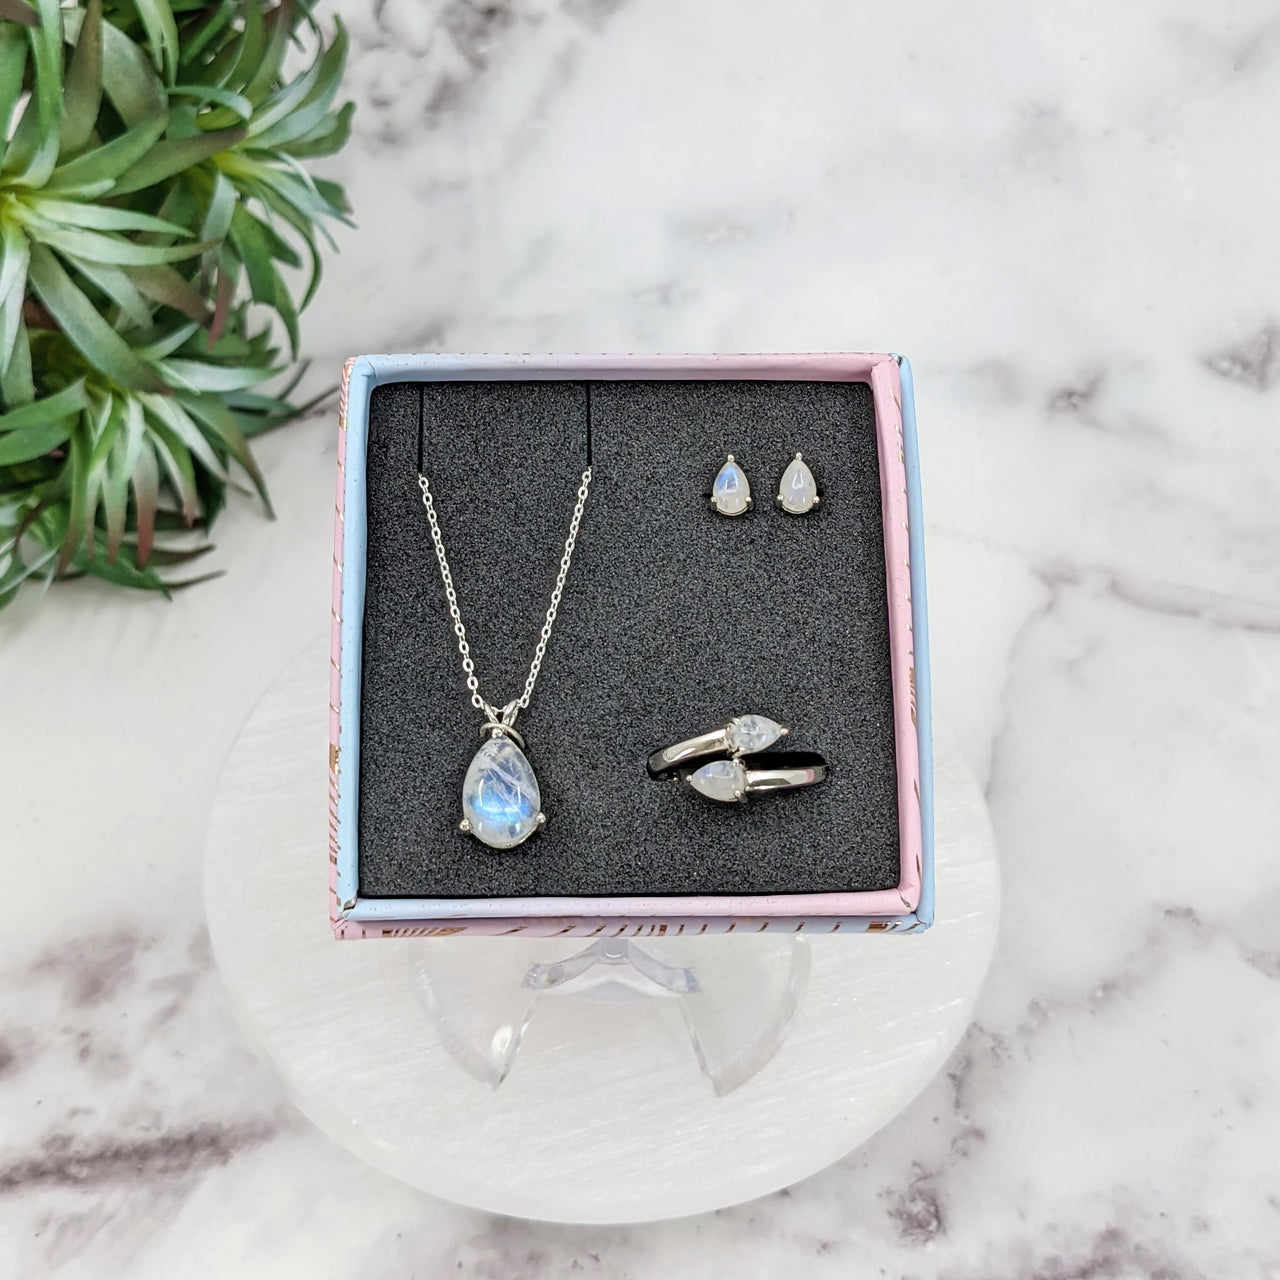 Moonstone Polished Jewelry 3 pc Box Set Sterling Silver Earrings, Pendant, Adjustable Ring  #LV3200